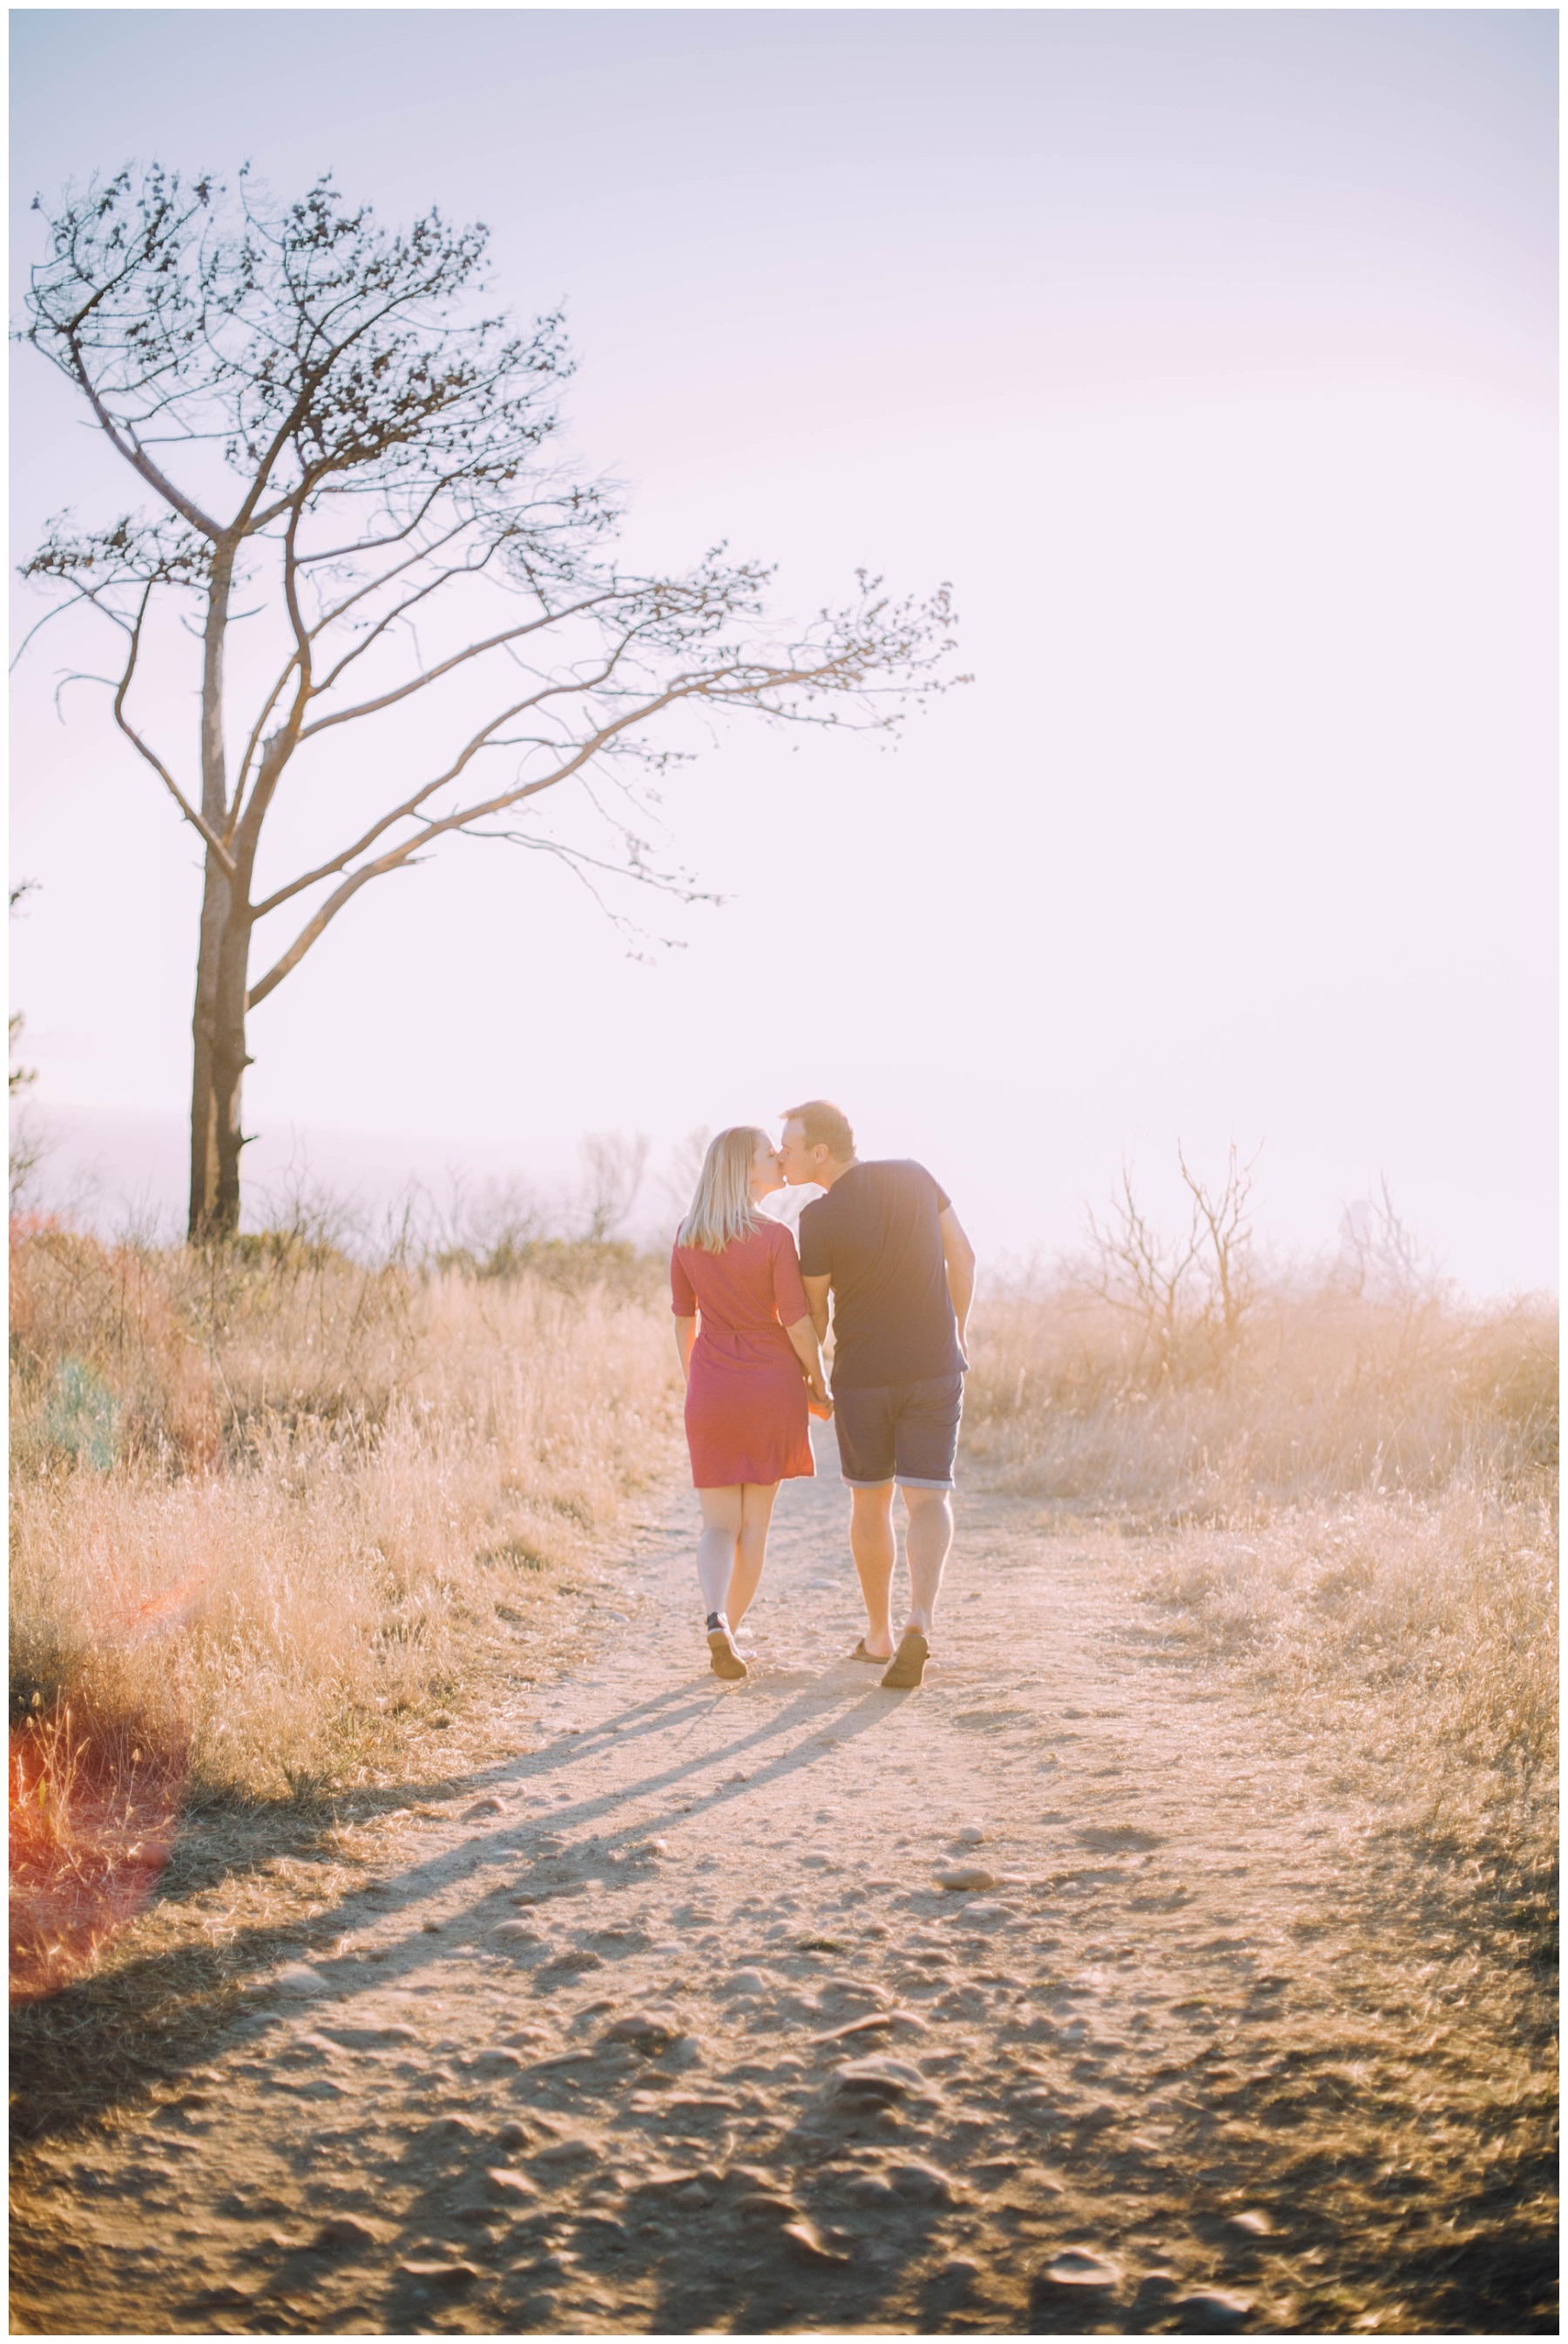 Ronel Kruger Cape Town Wedding and Lifestyle Photographer_2119.jpg